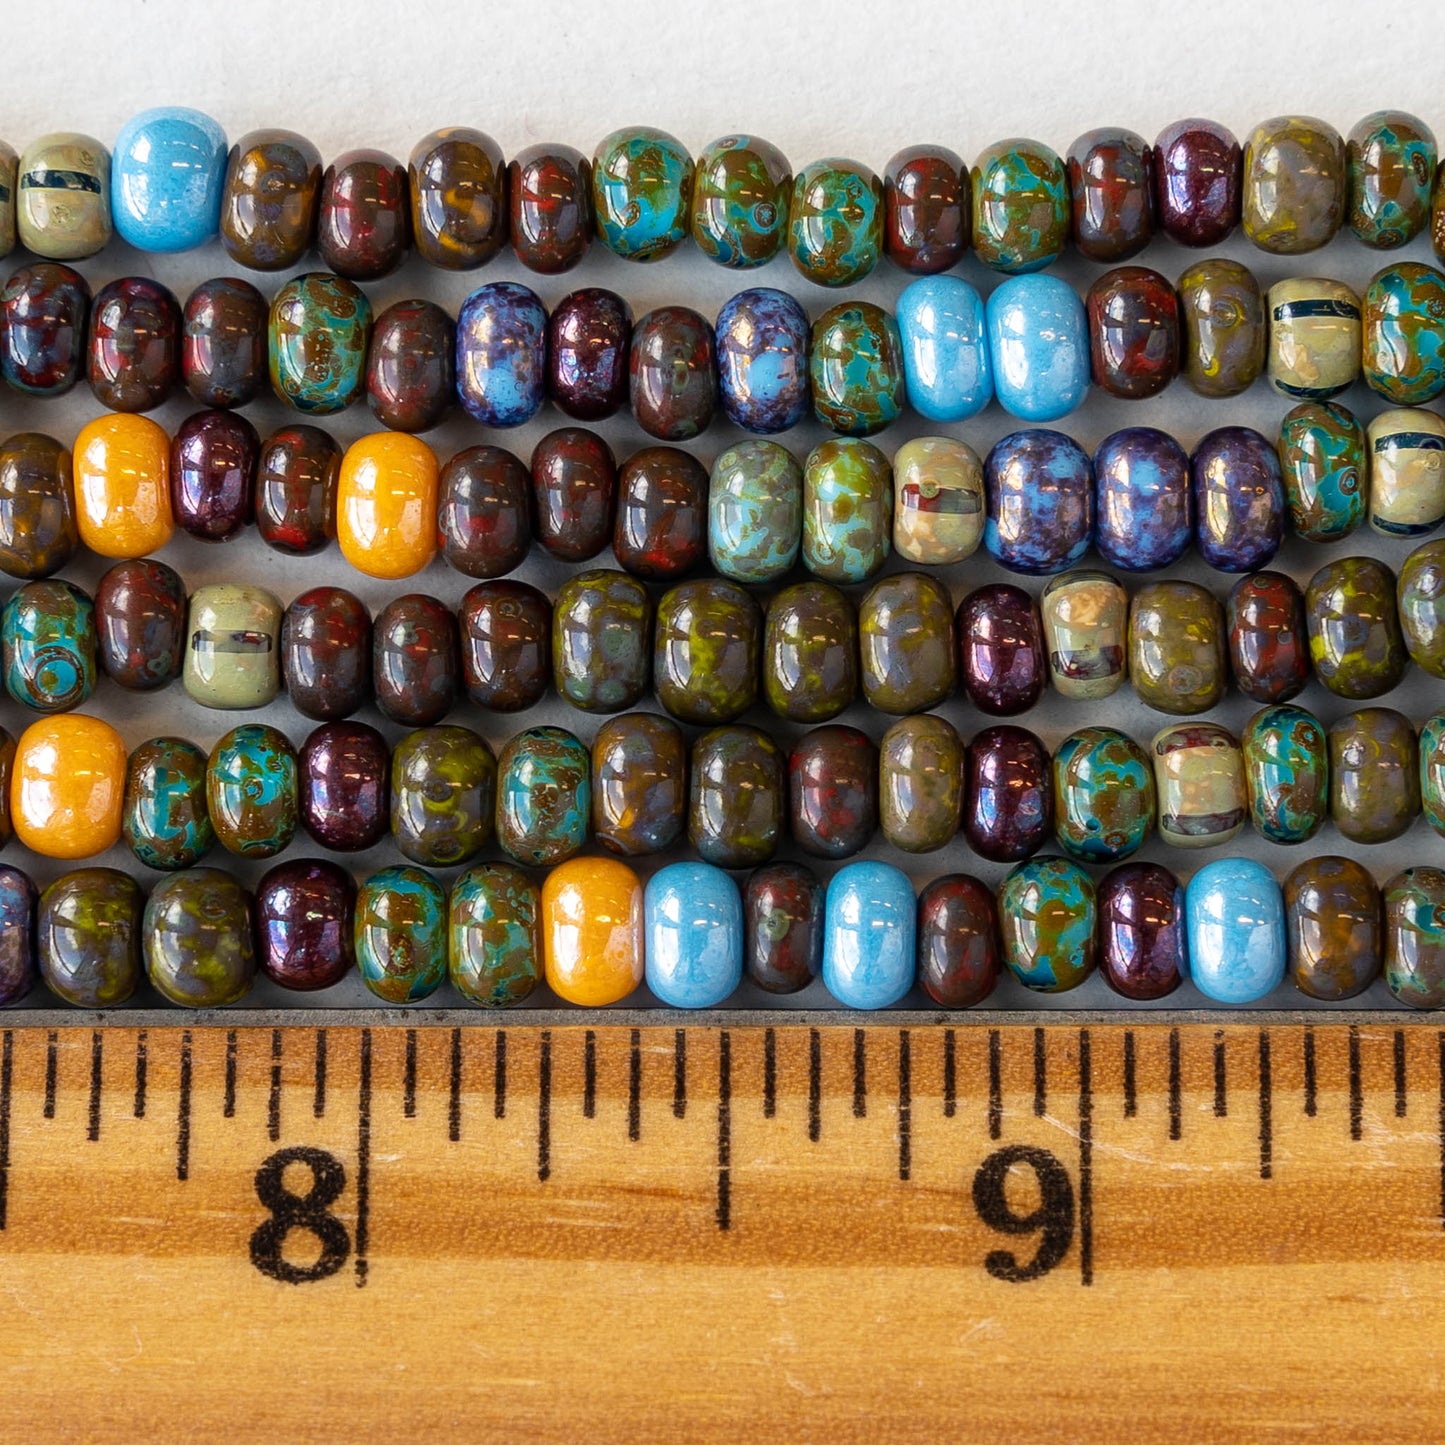 Size 4 Seed Beads - Luster Picasso Mix - 20 or 60"